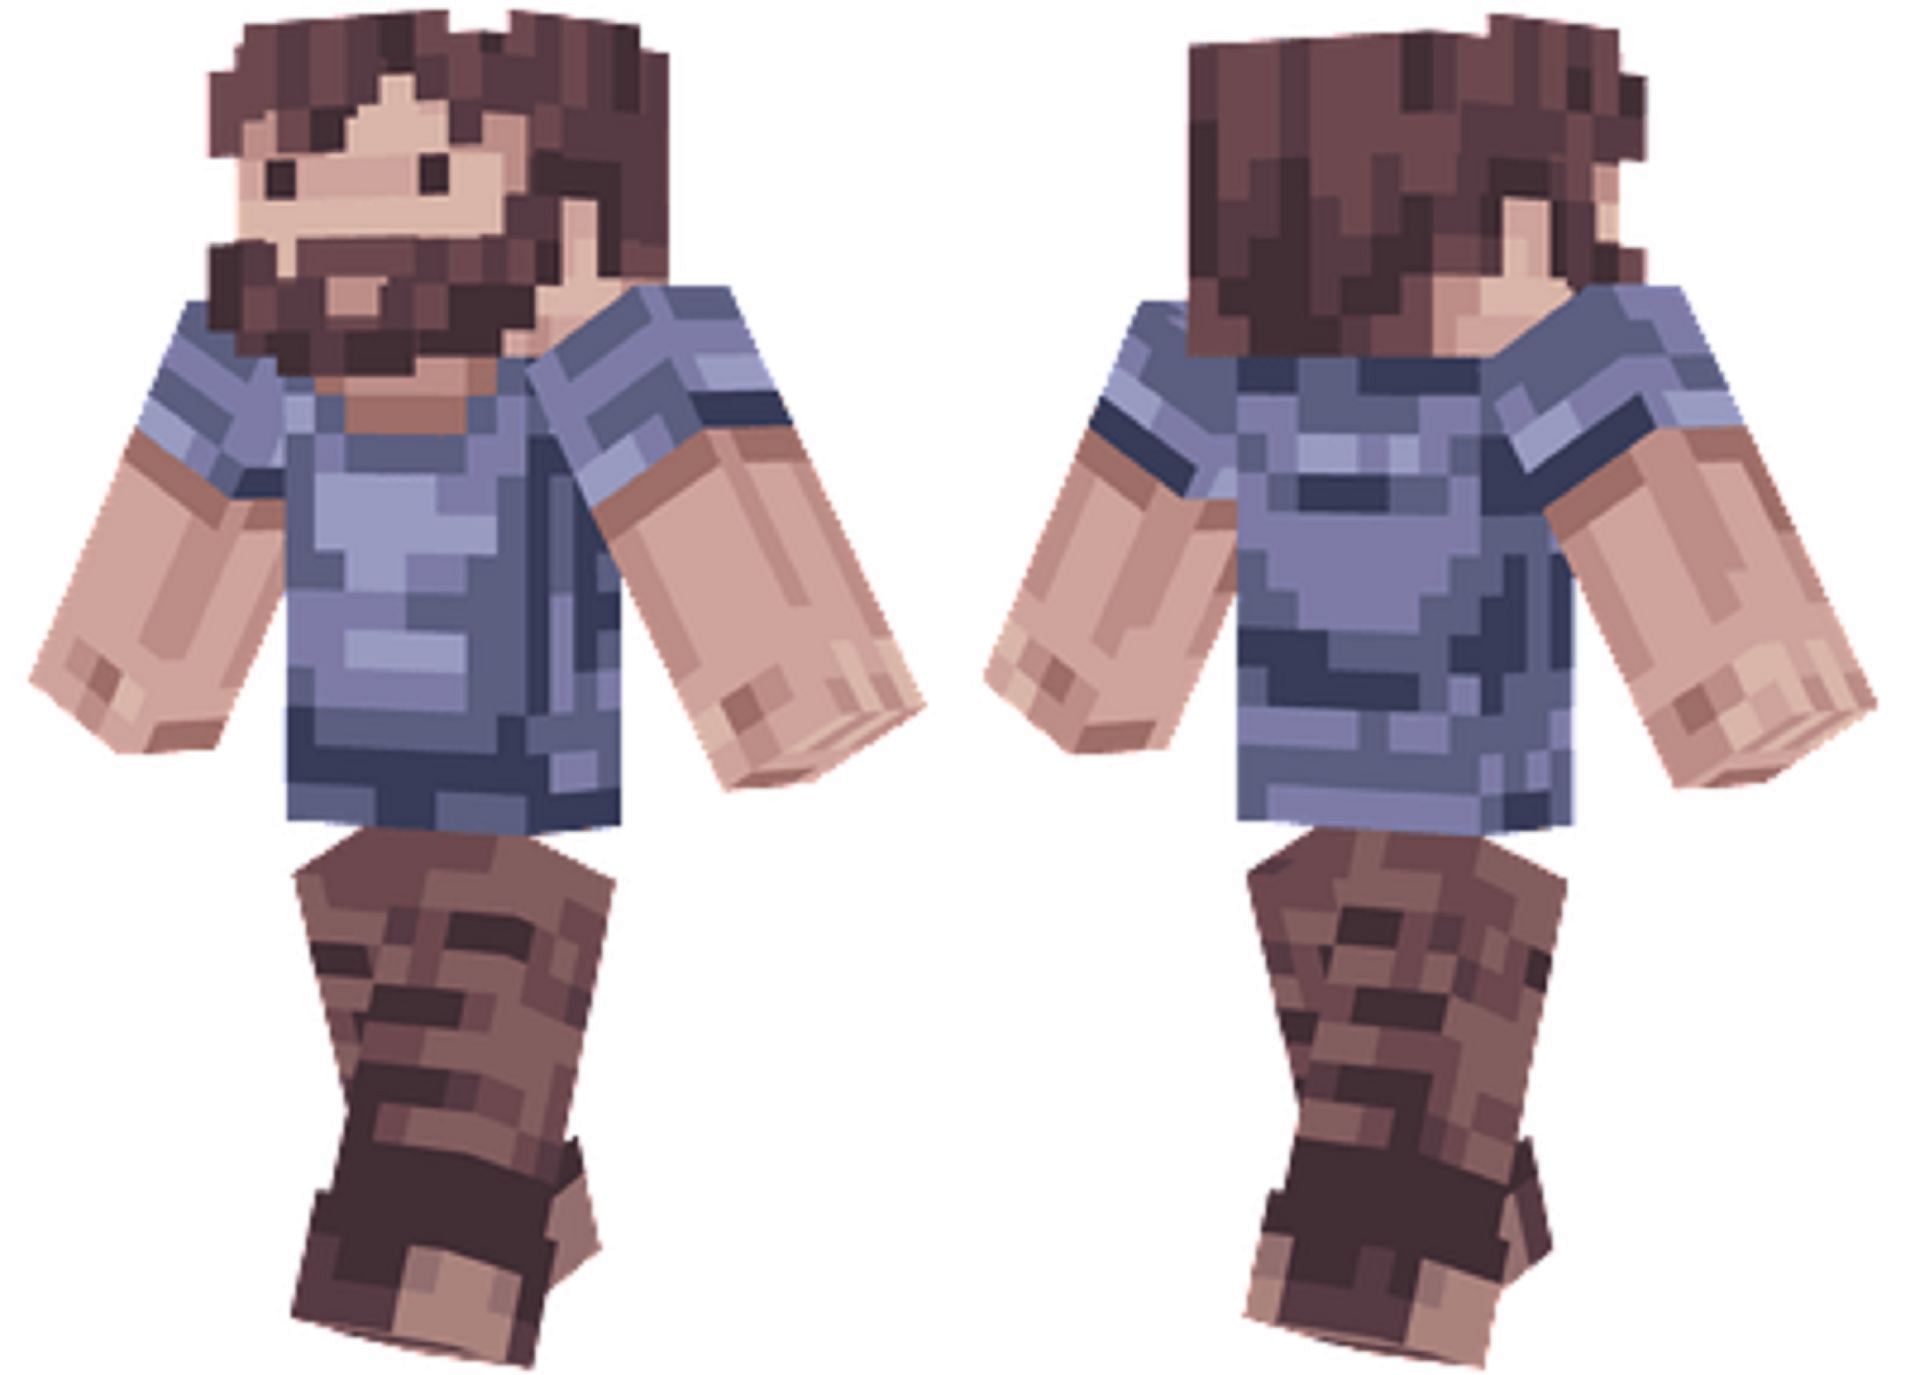 Steve takes on a whole new look with this skin (Image via CornCobDog/MinecraftSkins.net)